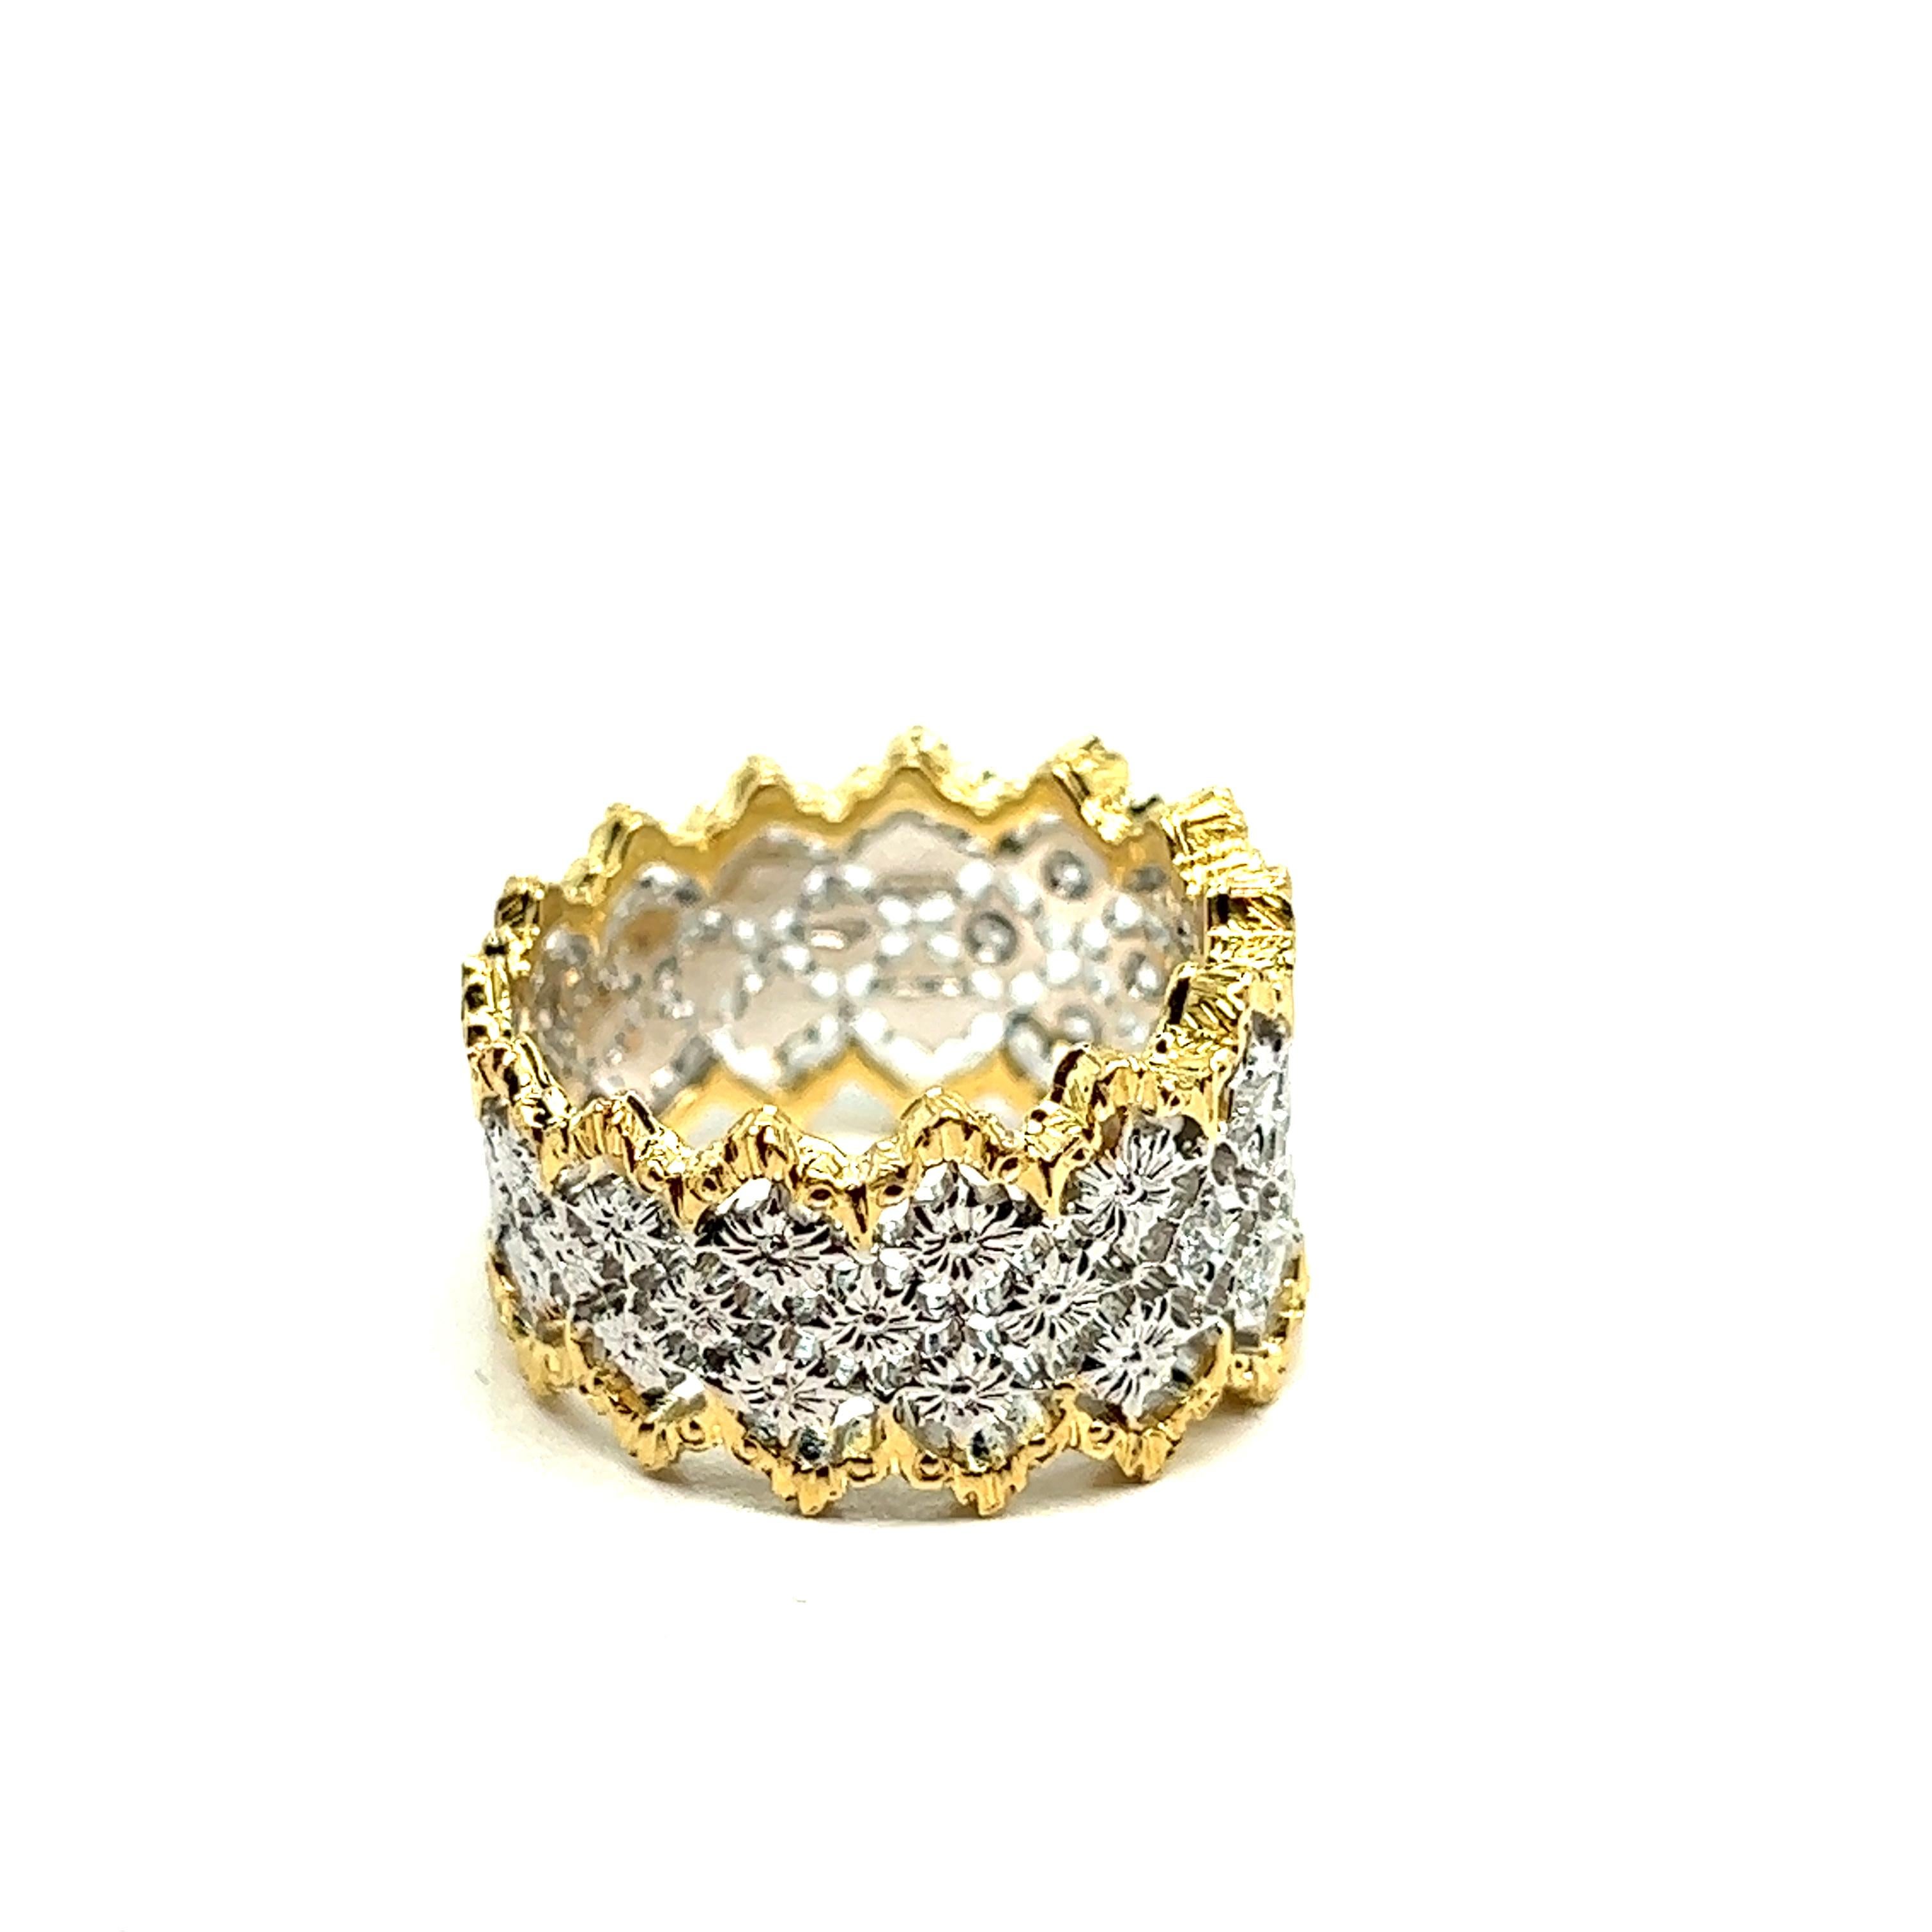 Baroque Lace Ring with 13 Brilliant Cut Diamonds in 18K White and Yellow Gold 1